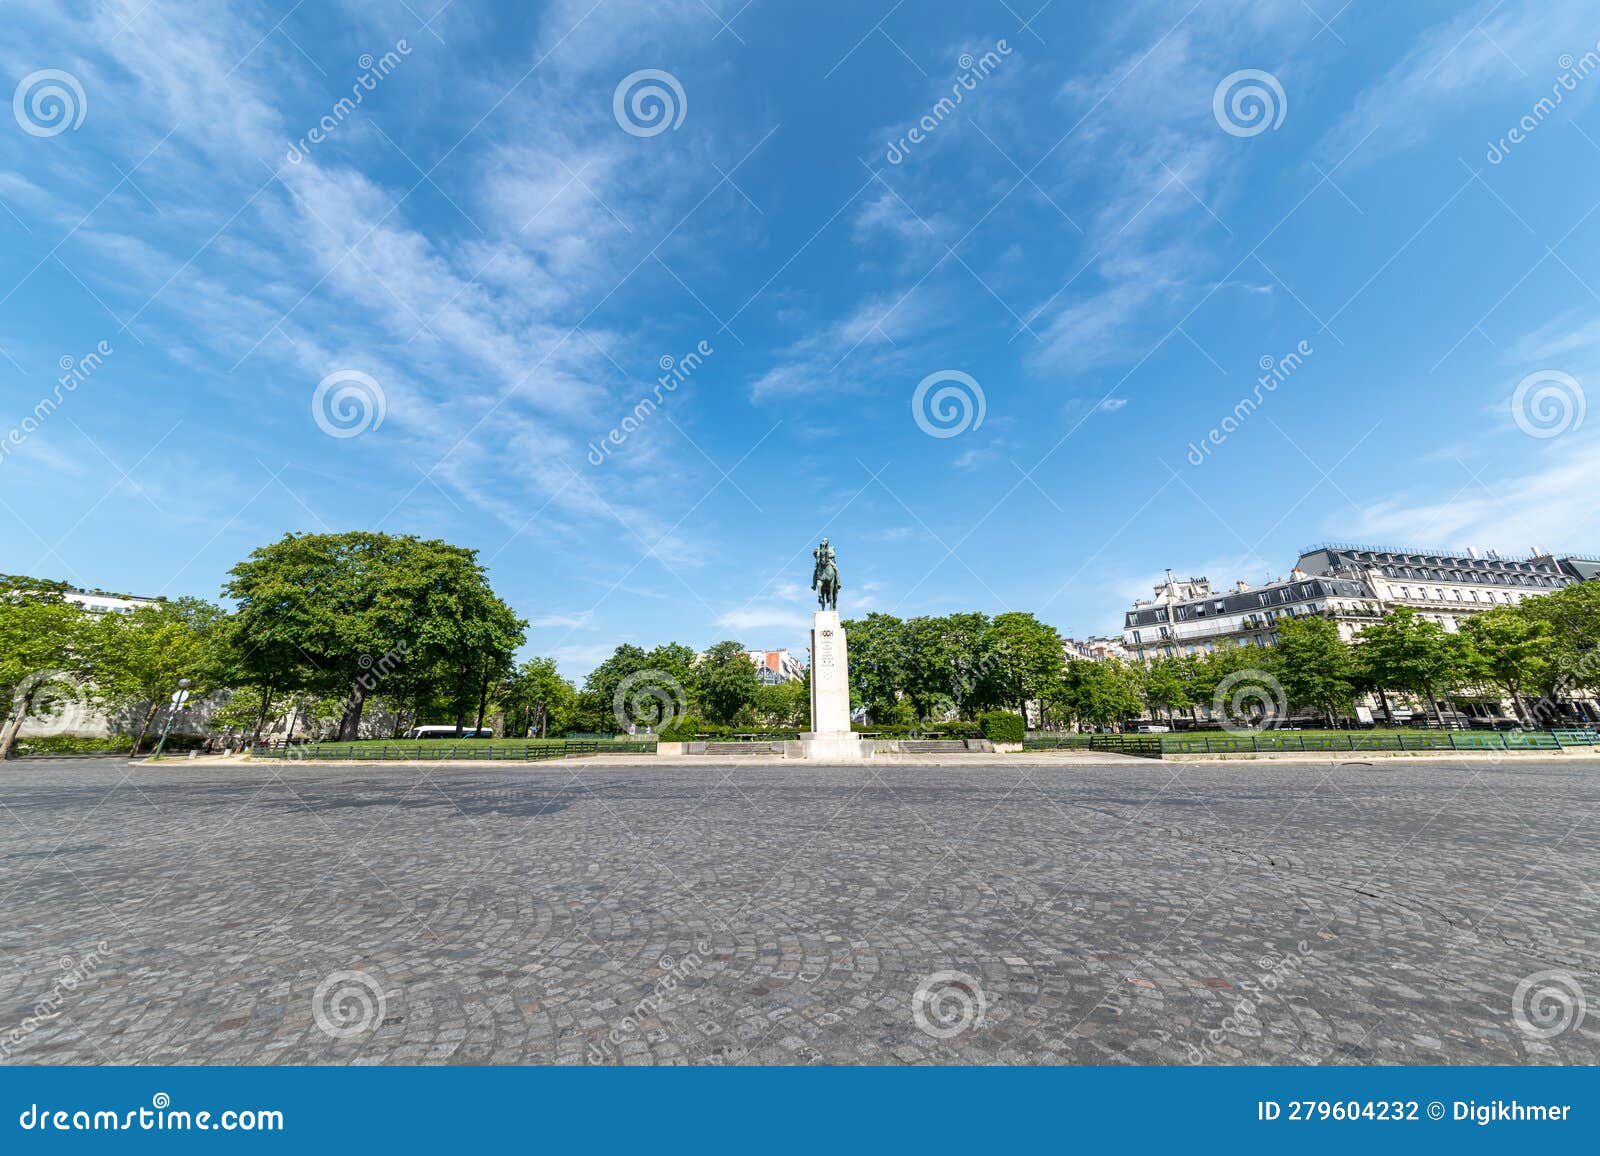 statute of the french general foch at the trocadero place